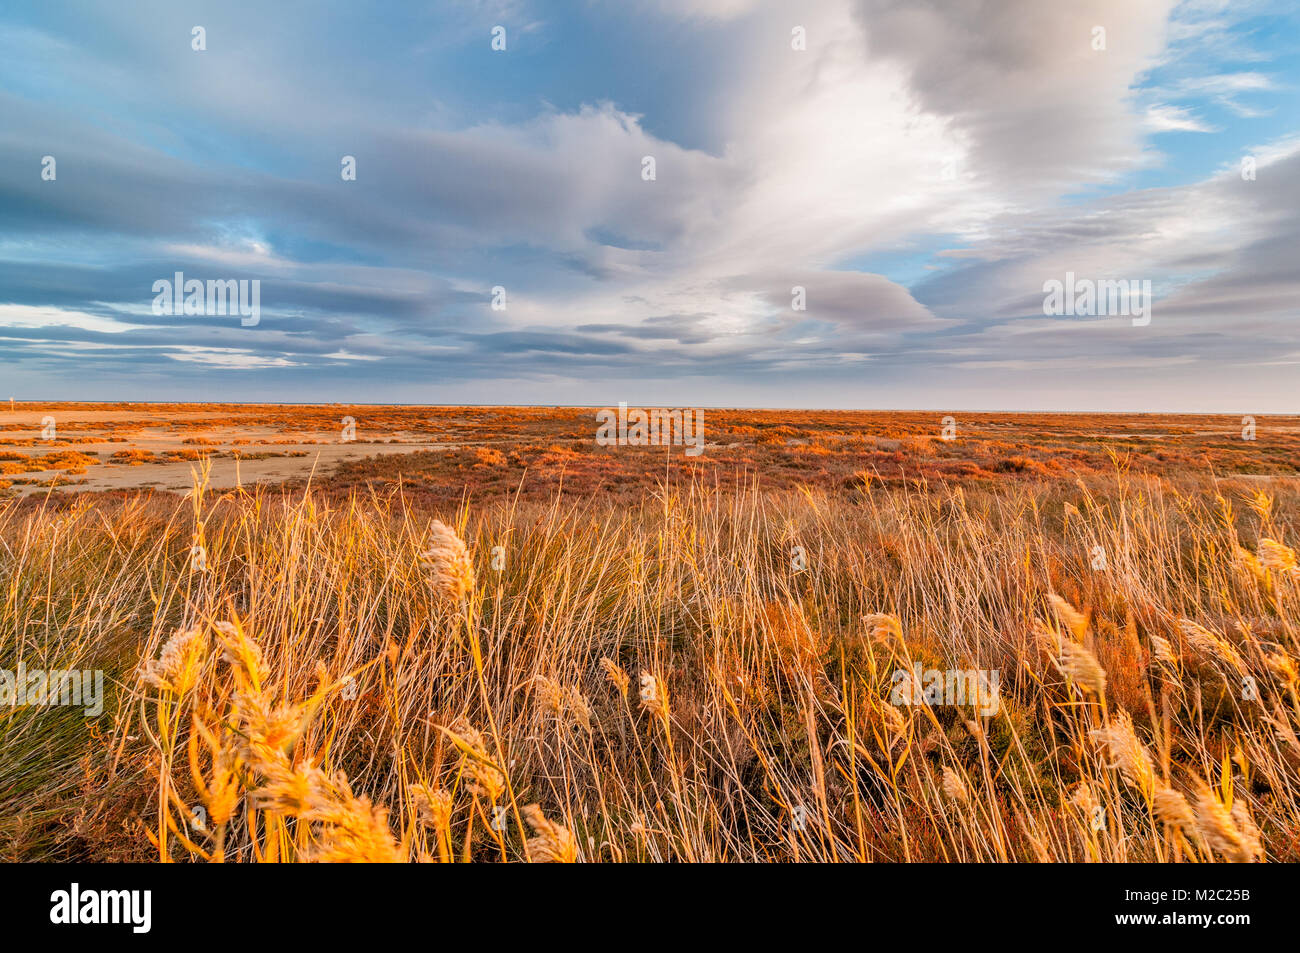 common reed in the foreground with the sky with clouds, Ebro Delta, Catalonia, Spain Stock Photo